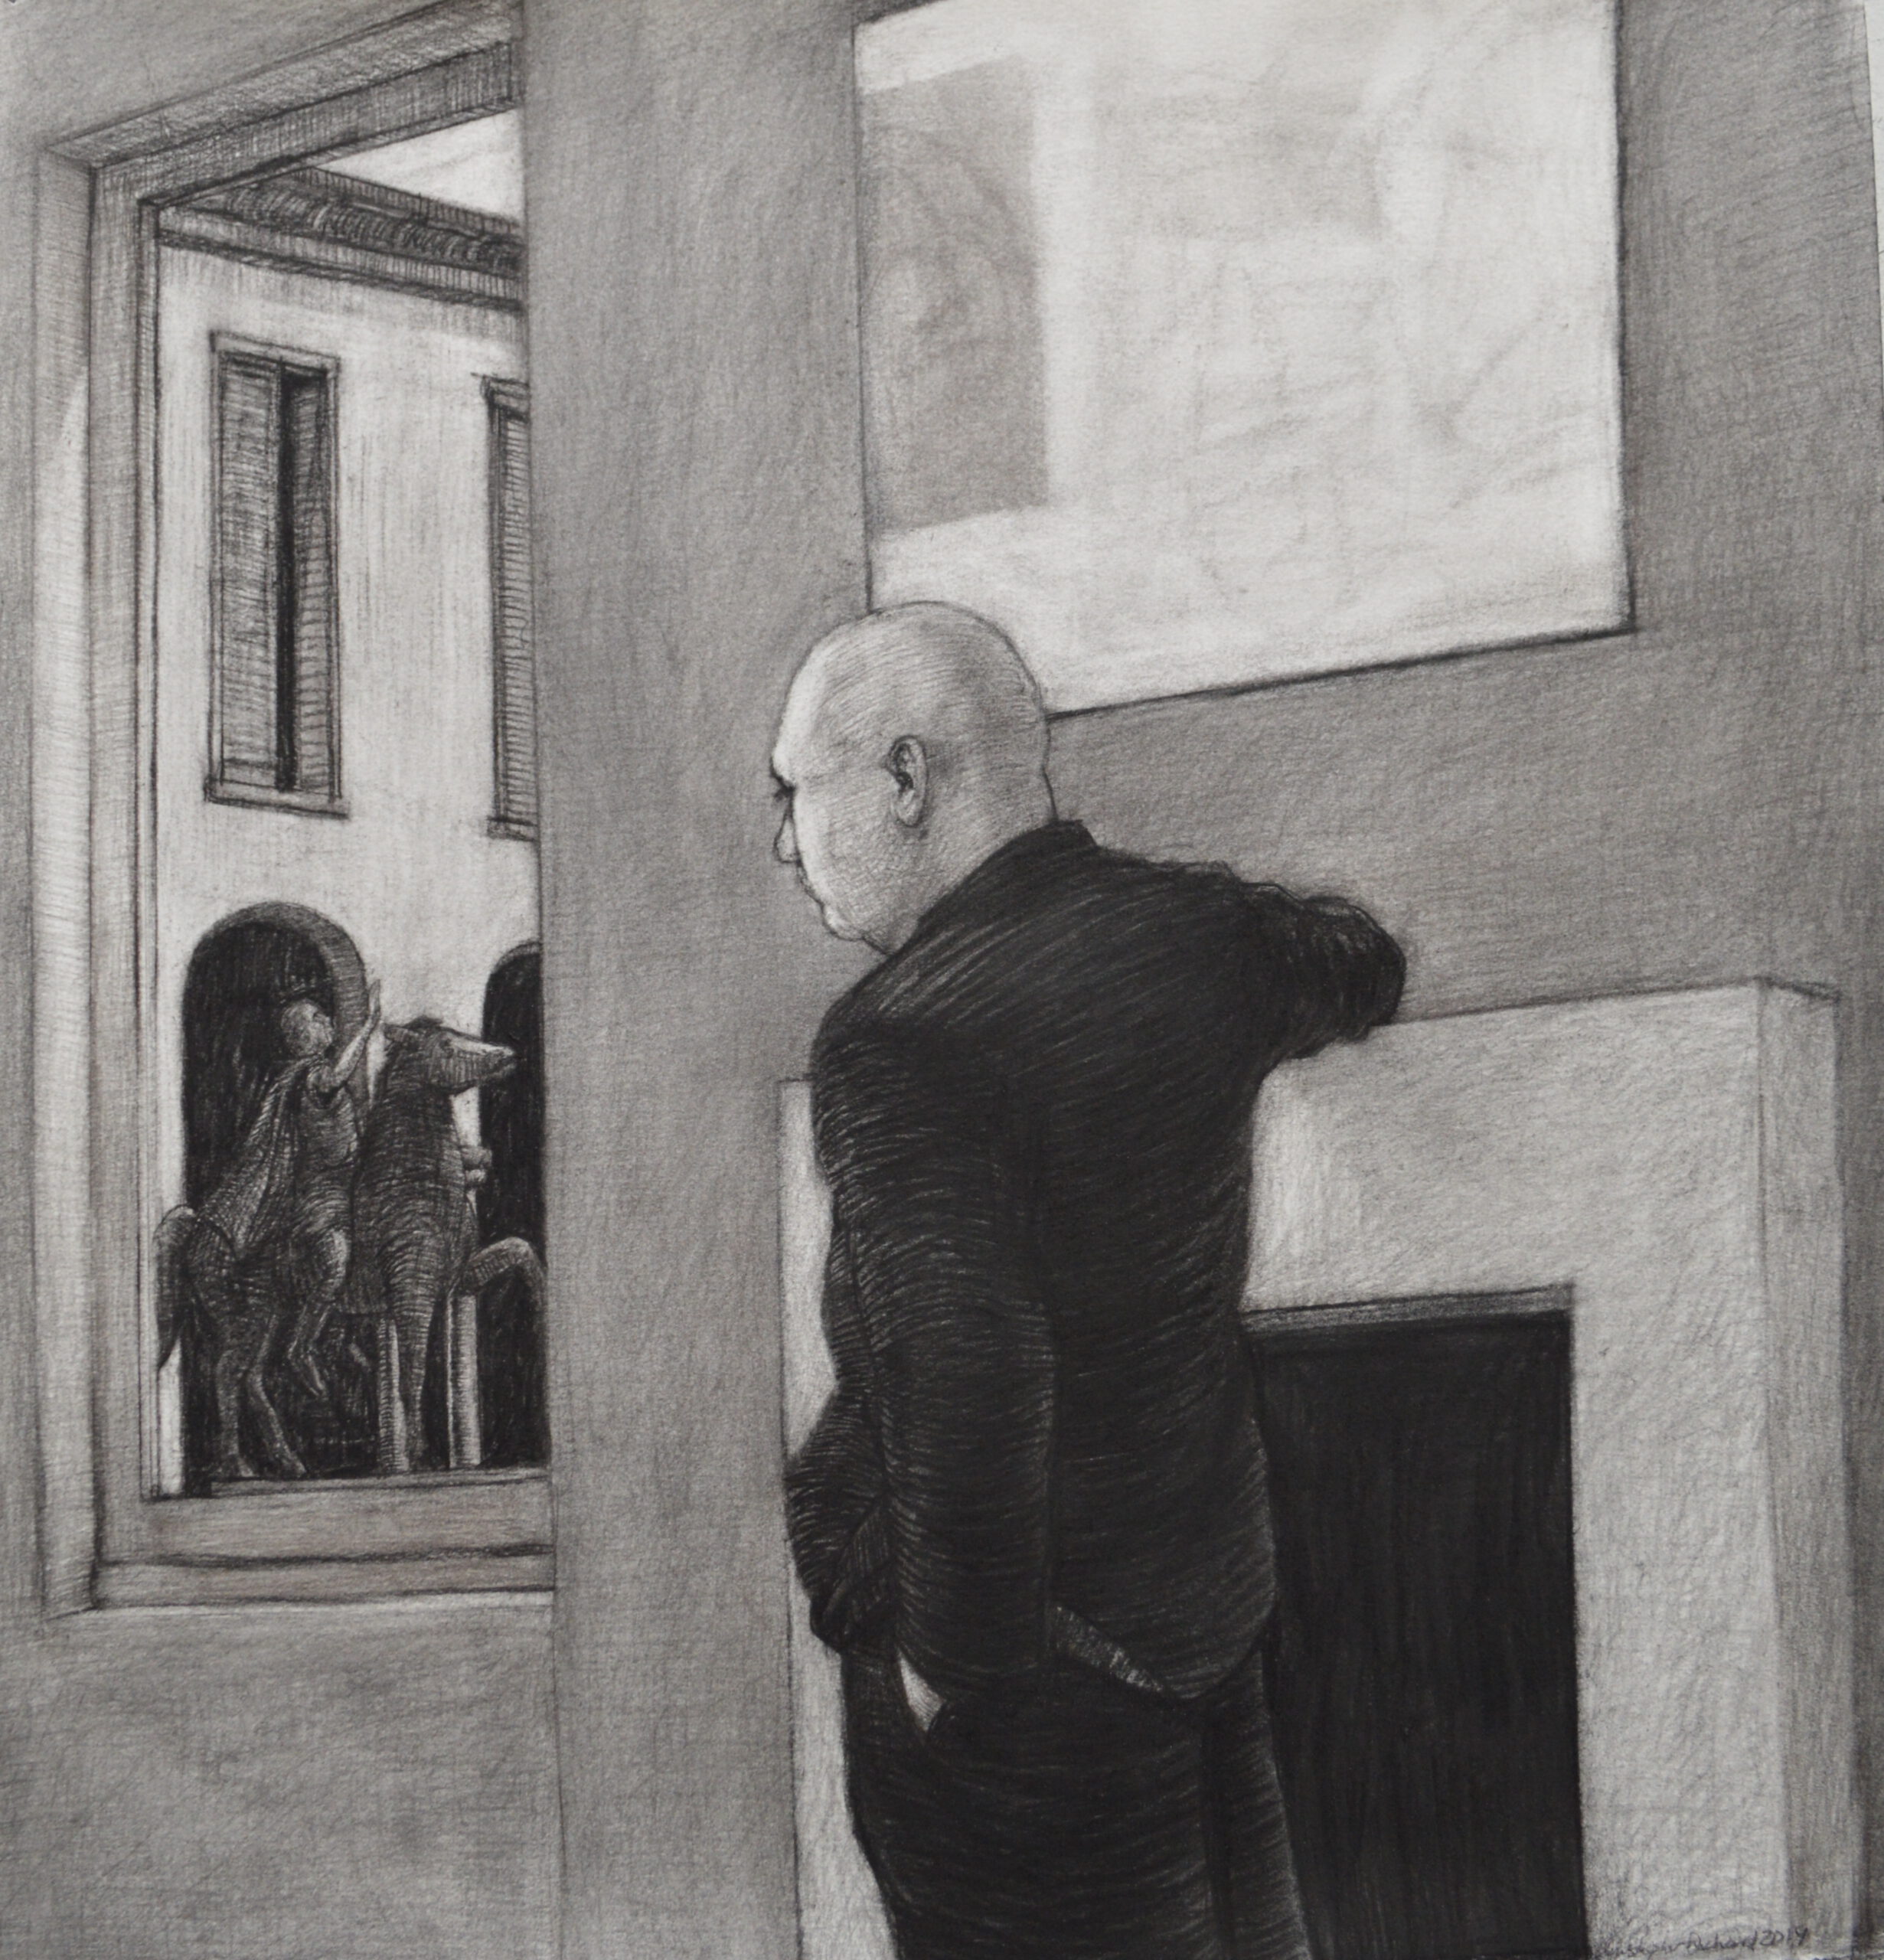 Christopher Orchard ‘The Writer’ charcoal on paper 54 x 51cm $3,800